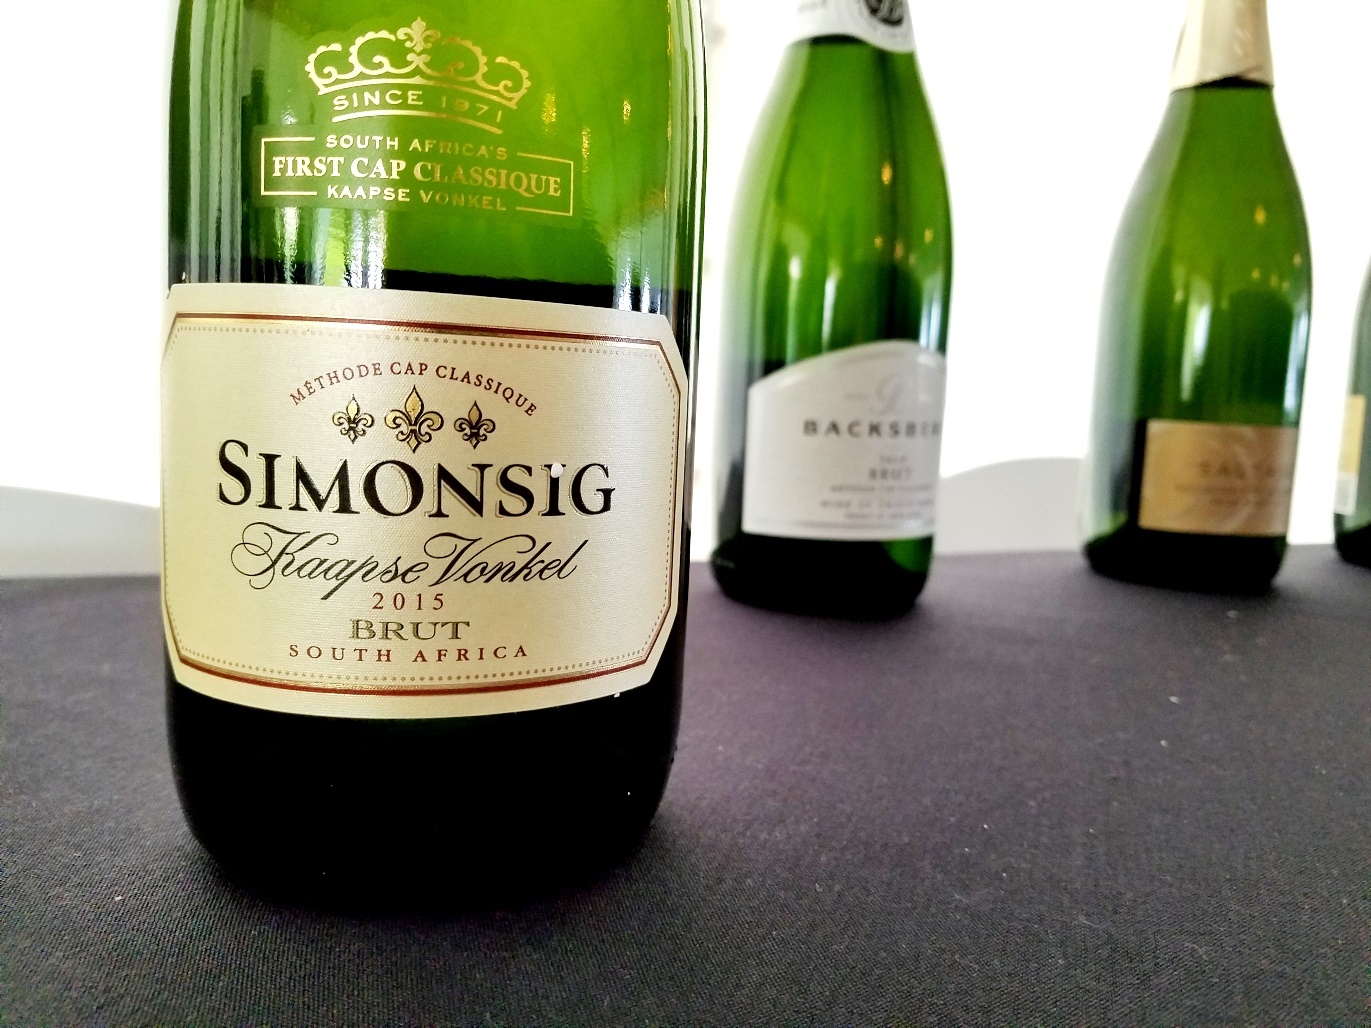 Simonsig, Kaapse Vonkel Brut 2015, South Africa, Wine Casual